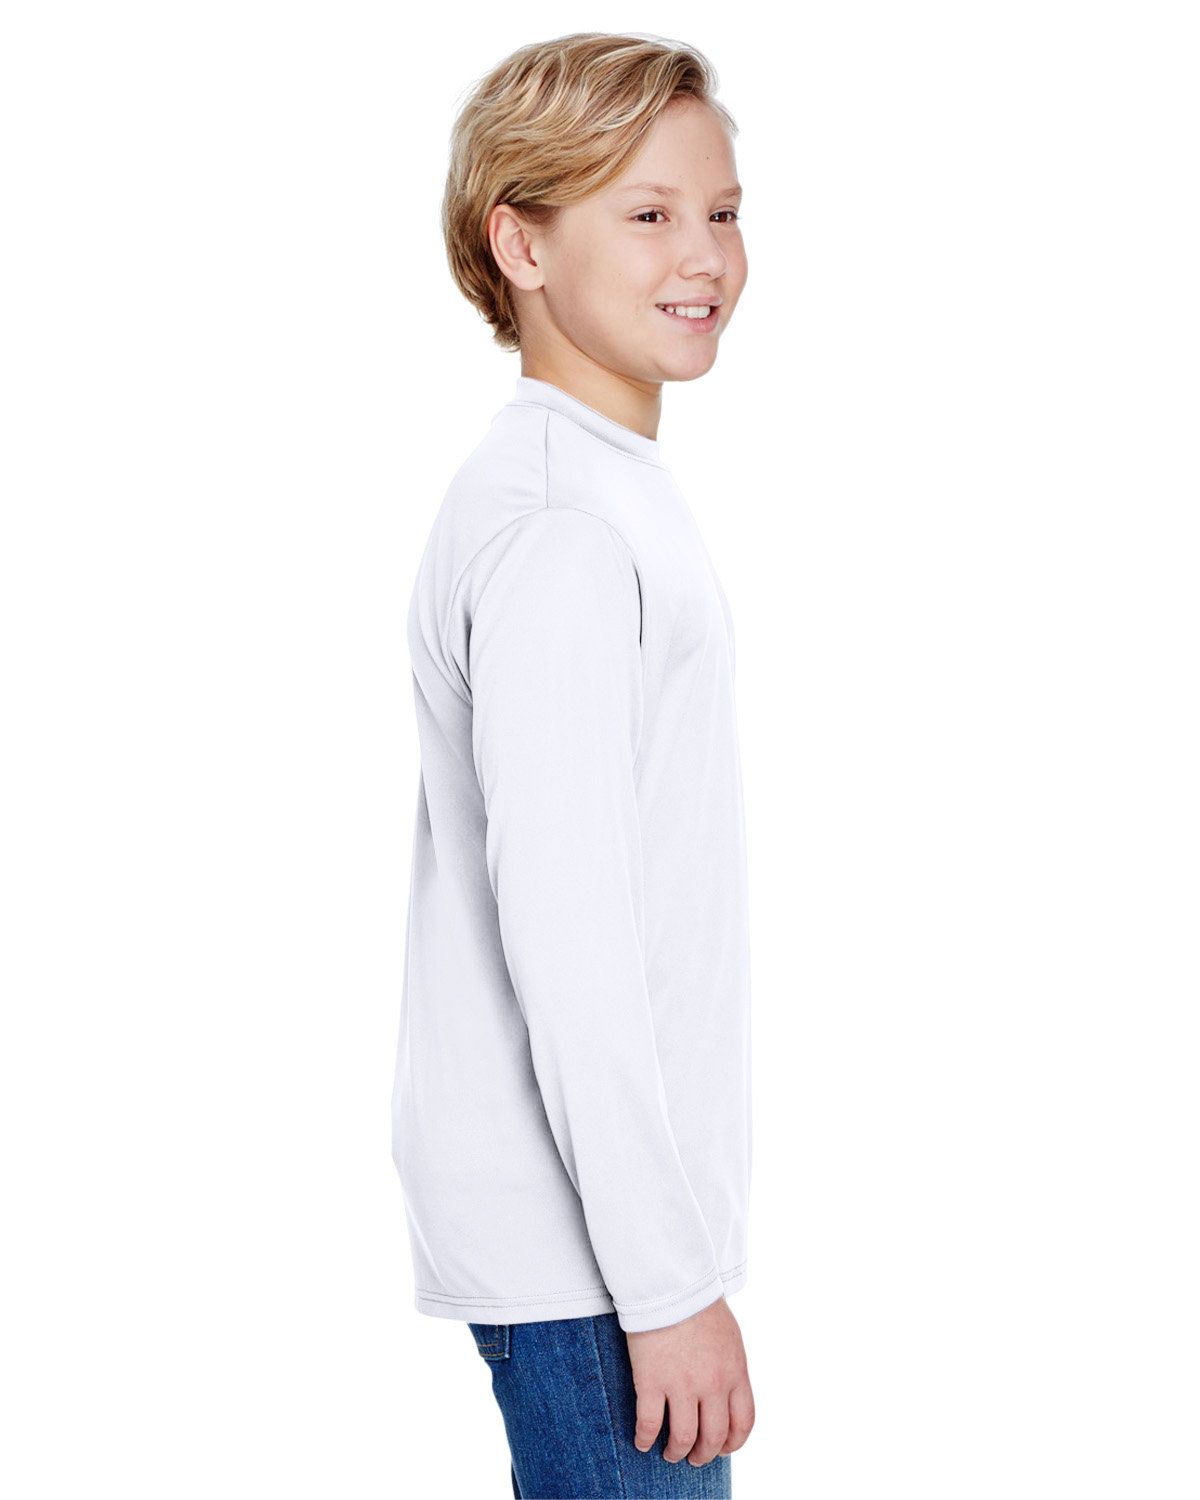 'A4 NB3165 Youth Long Sleeve Cooling Performance Crew Shirt'